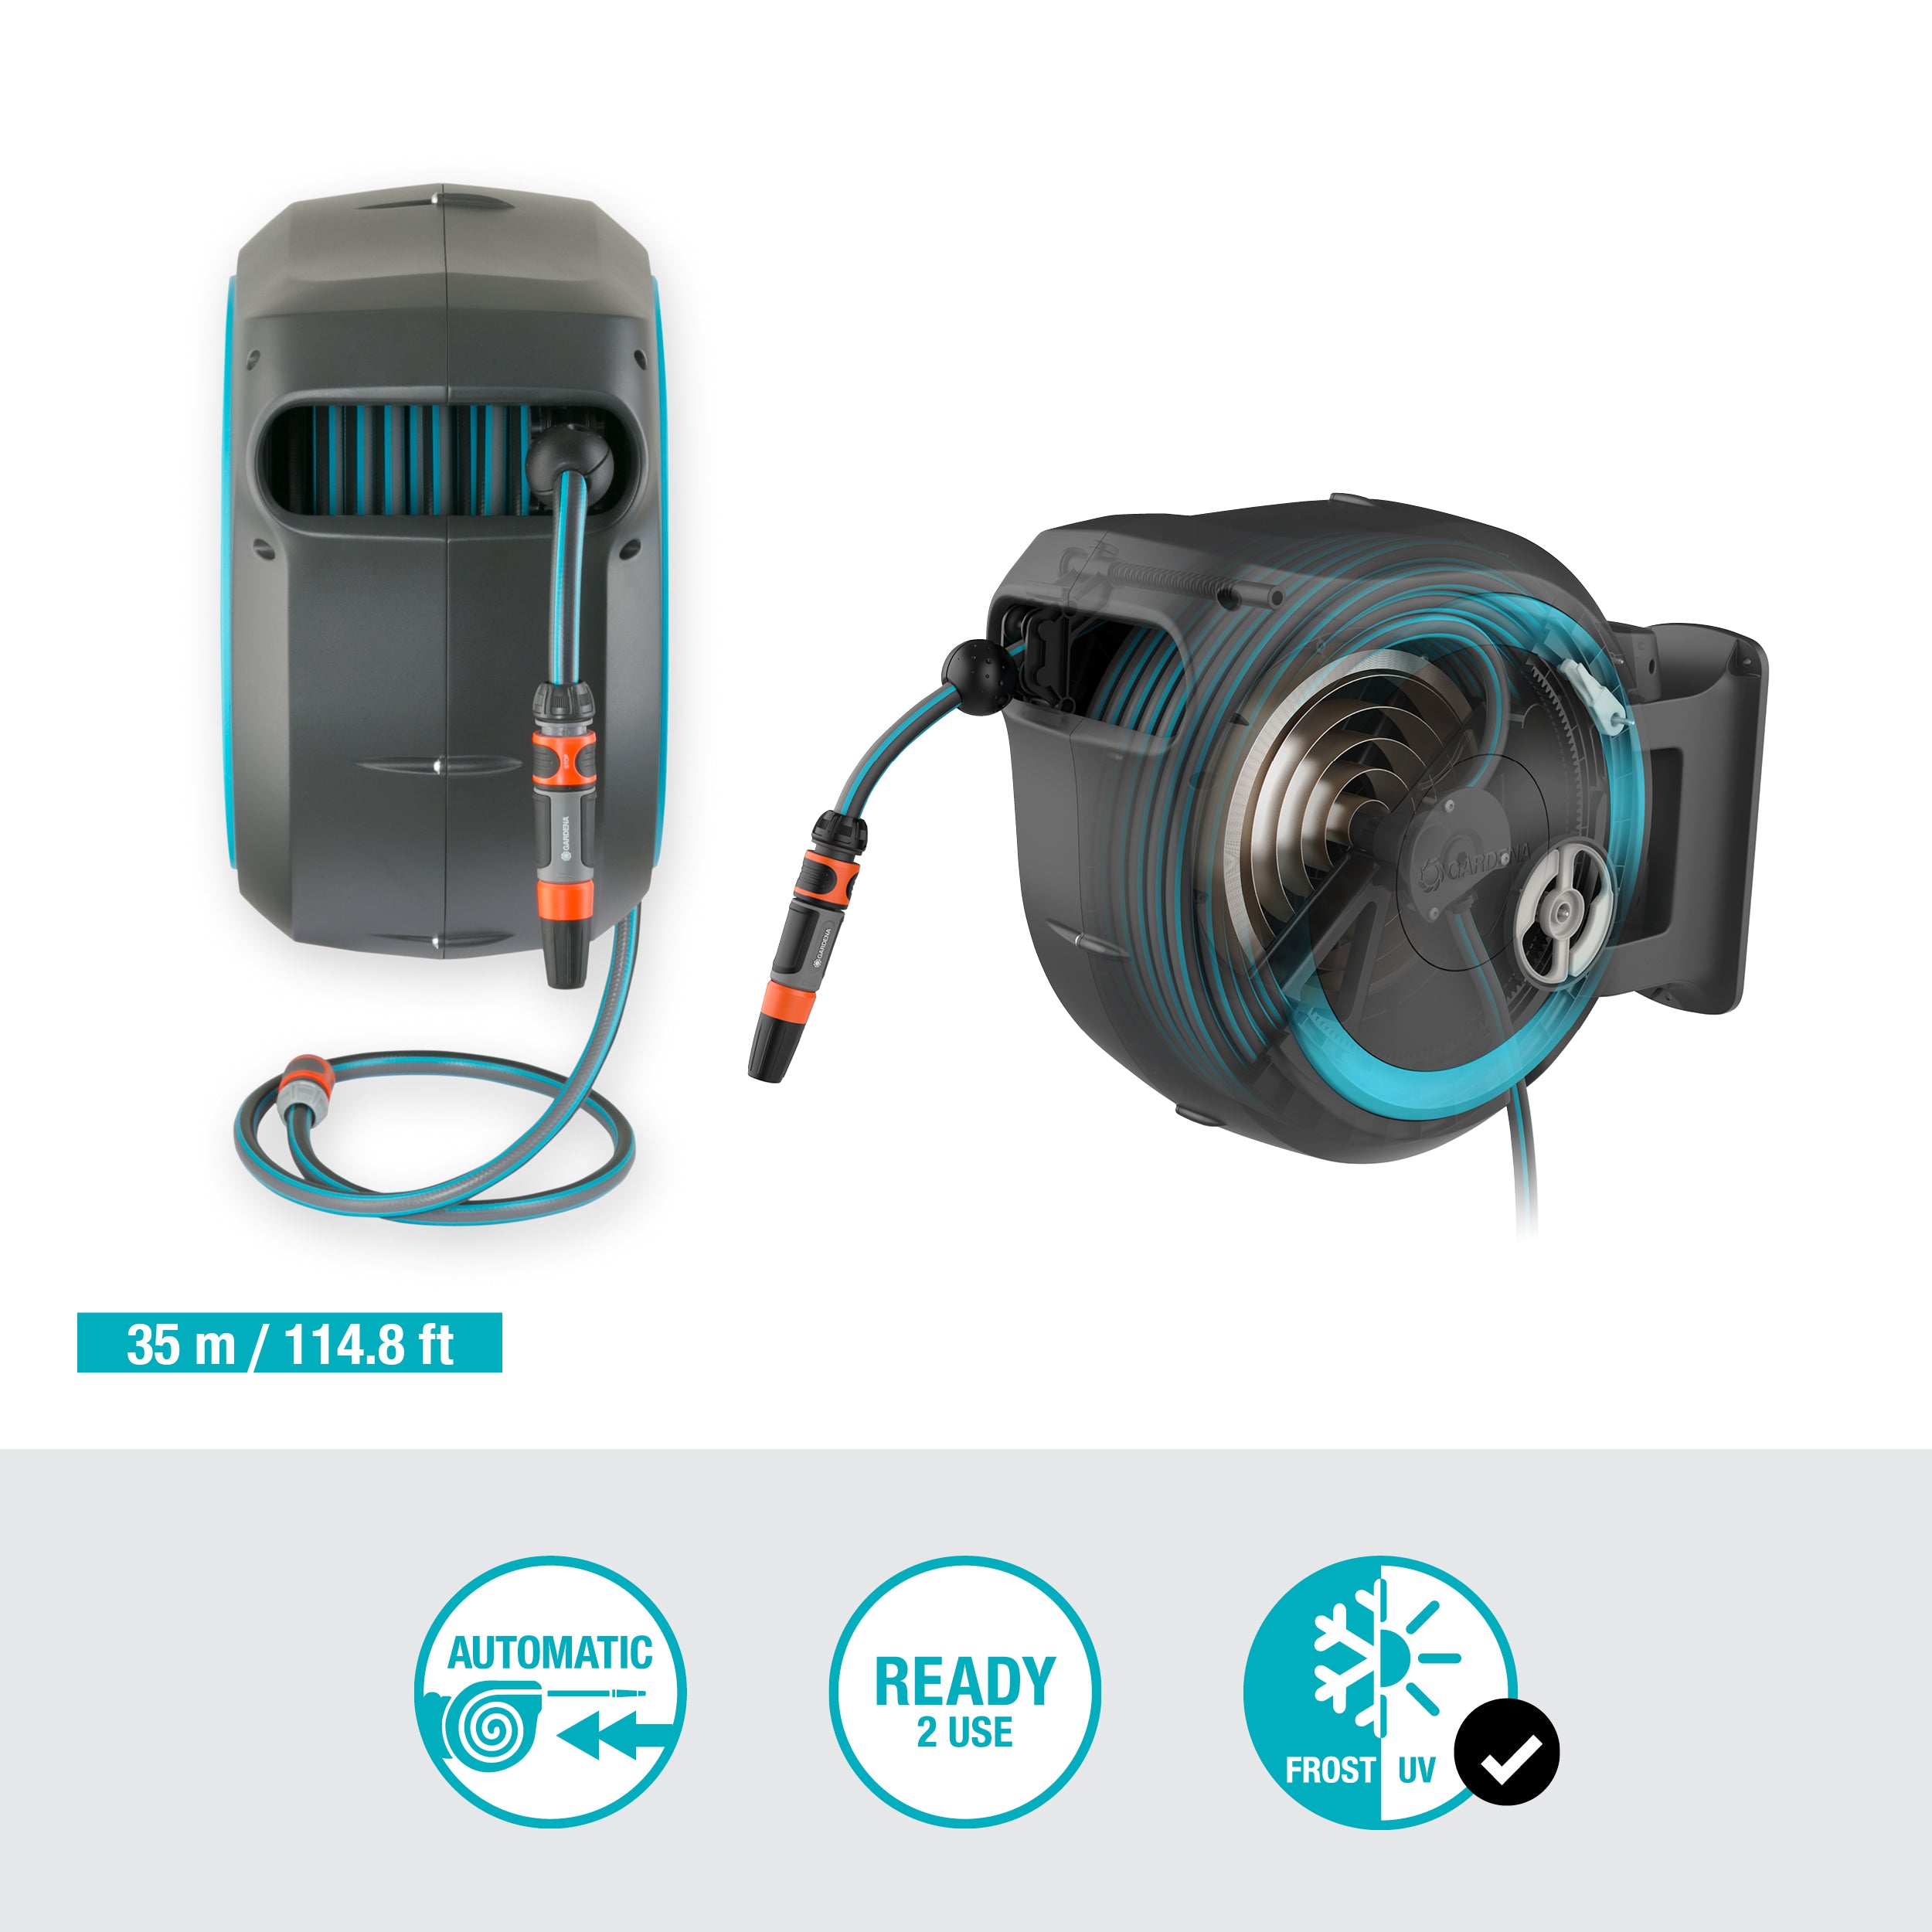 Gardena Wall Mounted Retractable Hose Reel, 115 Feet, Black and Turquoise